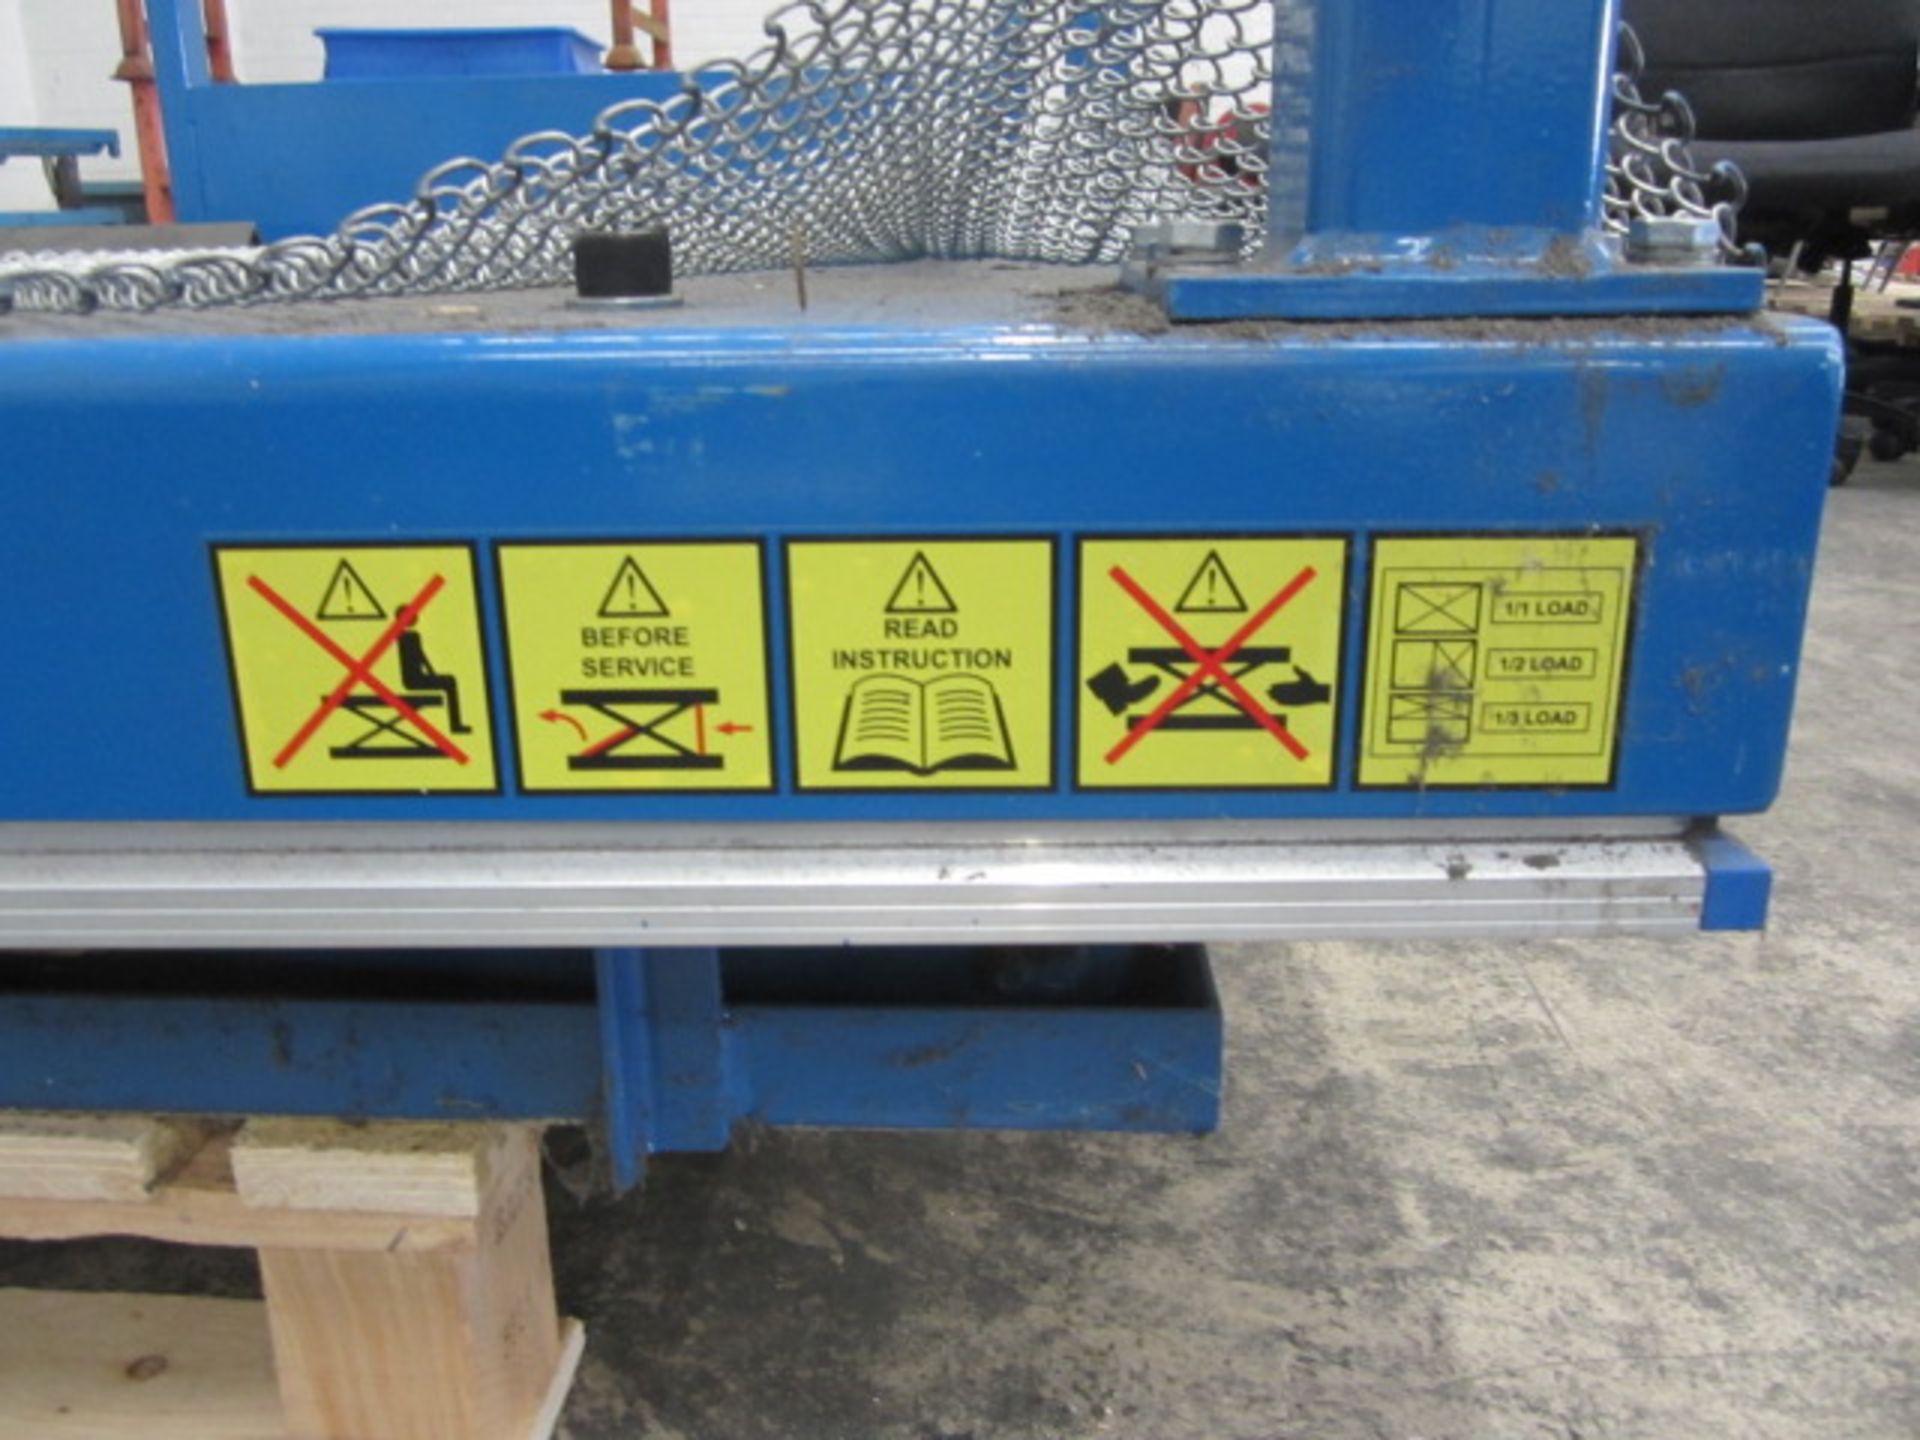 Saxon hydraulic lift table, approx. table size 1.9m x 1m with smeshed side, SWL 500kgs - dismantled. - Image 8 of 8